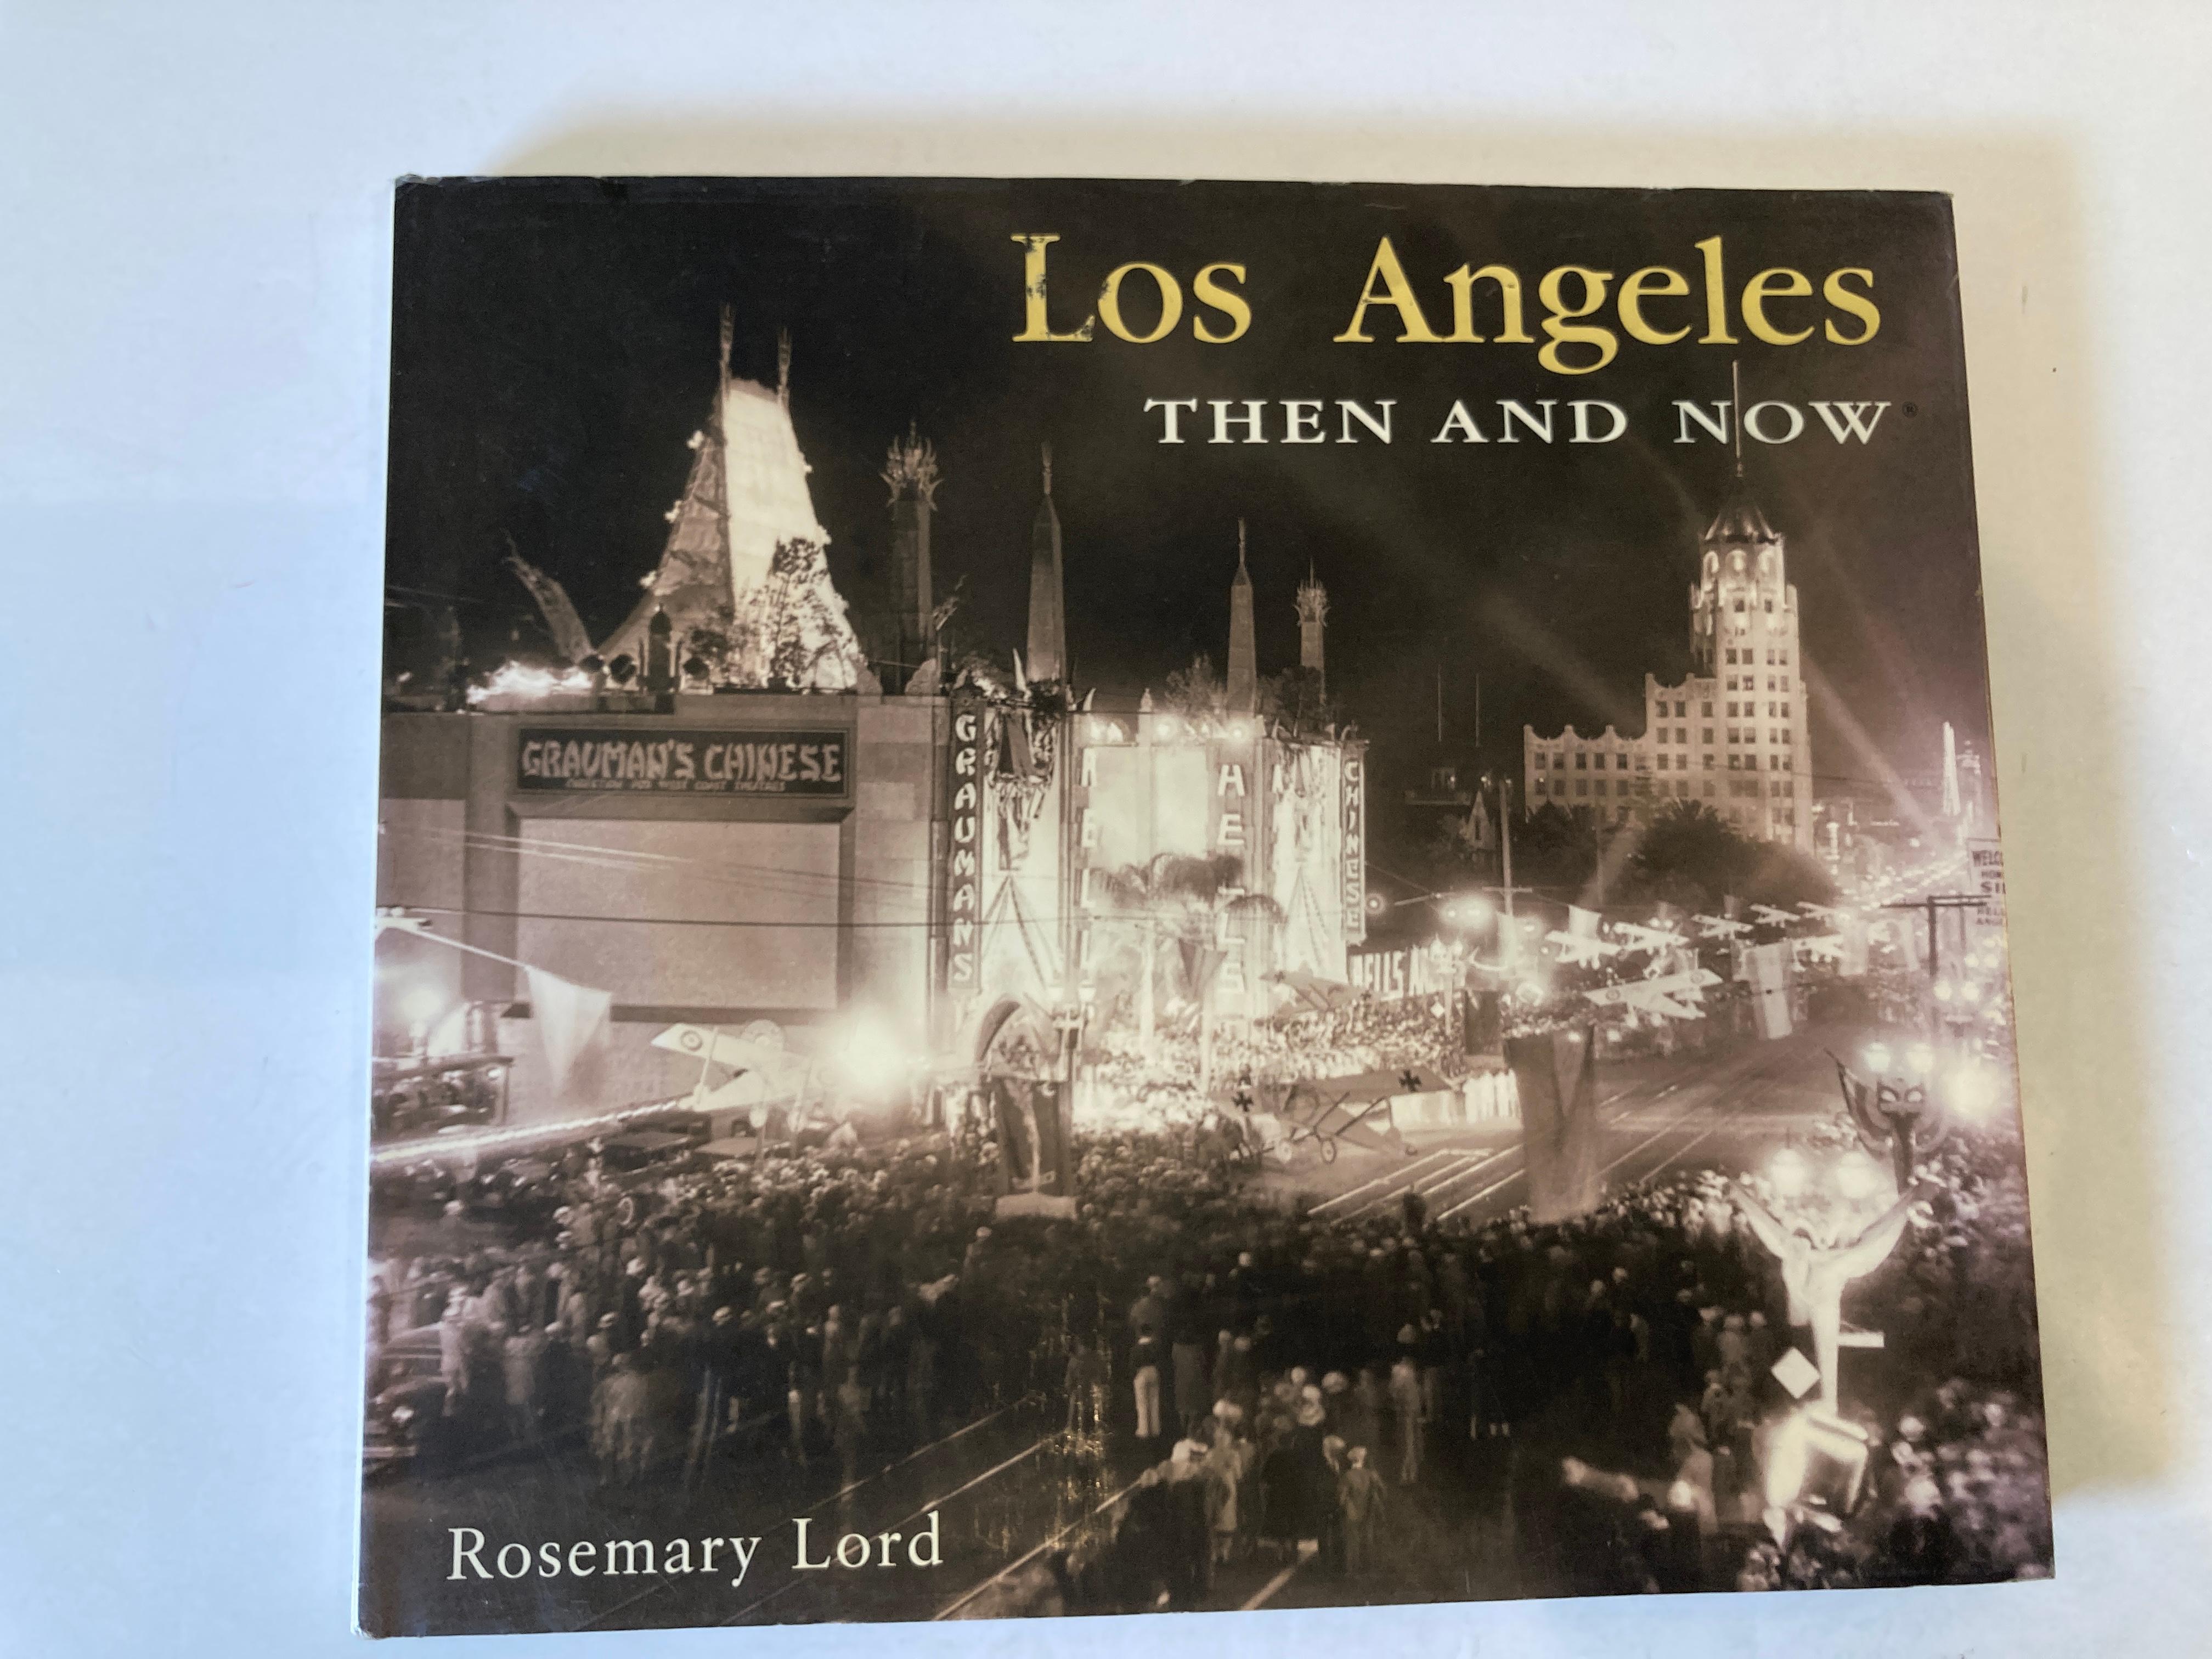 Los Angeles Then and Now
Lord, Rosemary.
Los Angeles, the City of Angels, is the capital of show business, where to be young and beautiful is to have it all. Los Angeles Then & Now is a captivating chronicle of history and change in the mecca of